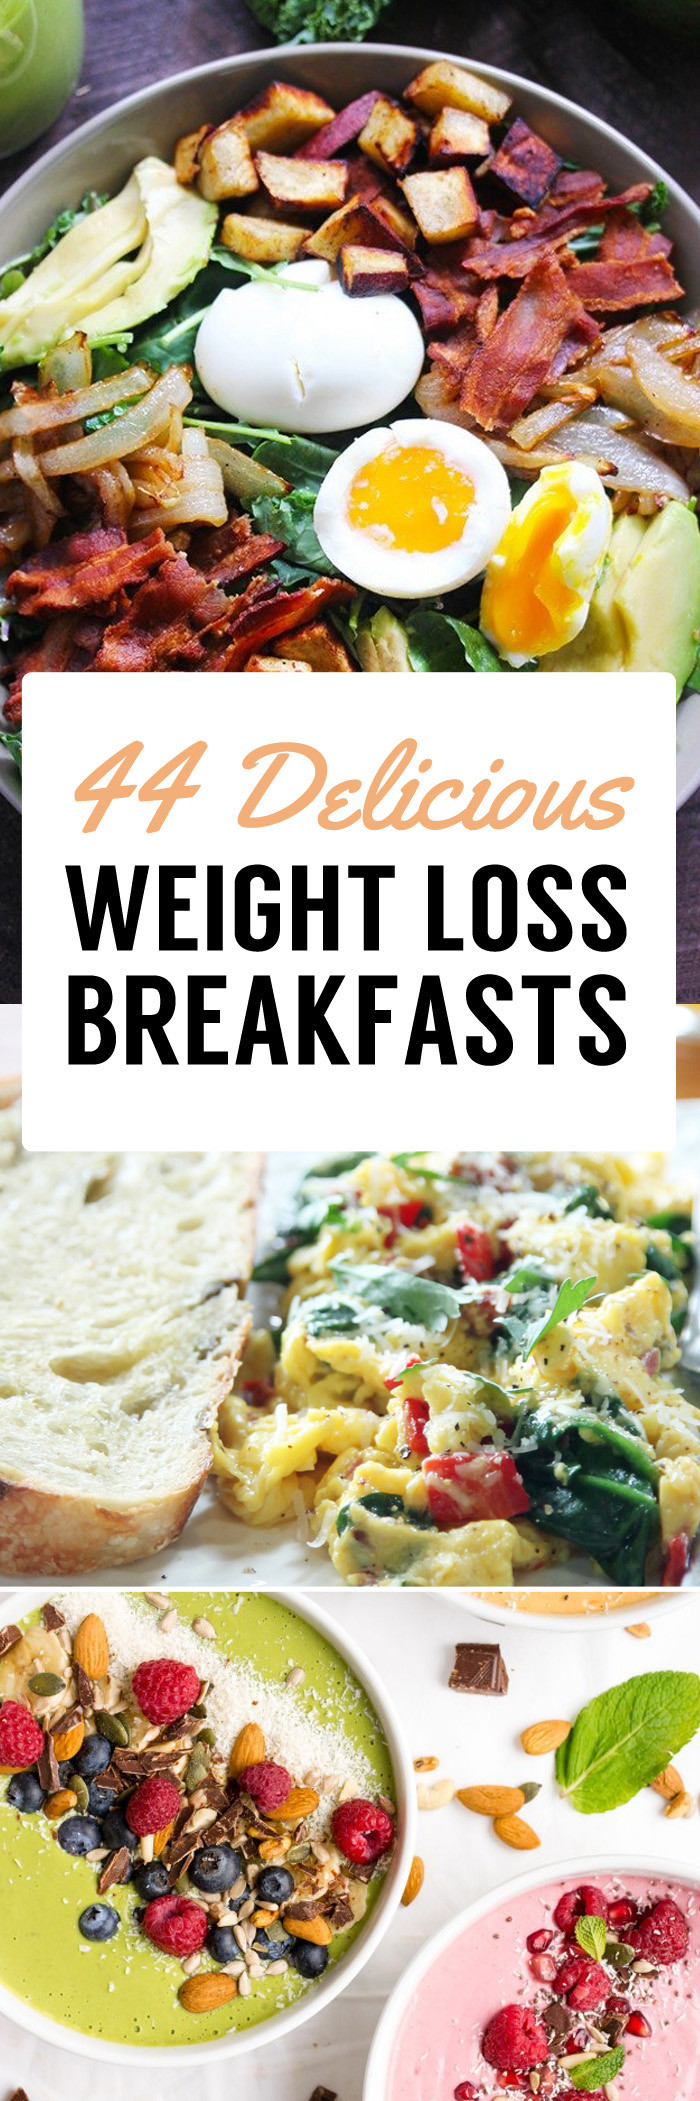 Weight Loss Meal Recipes
 44 Weight Loss Breakfast Recipes To Jumpstart Your Fat